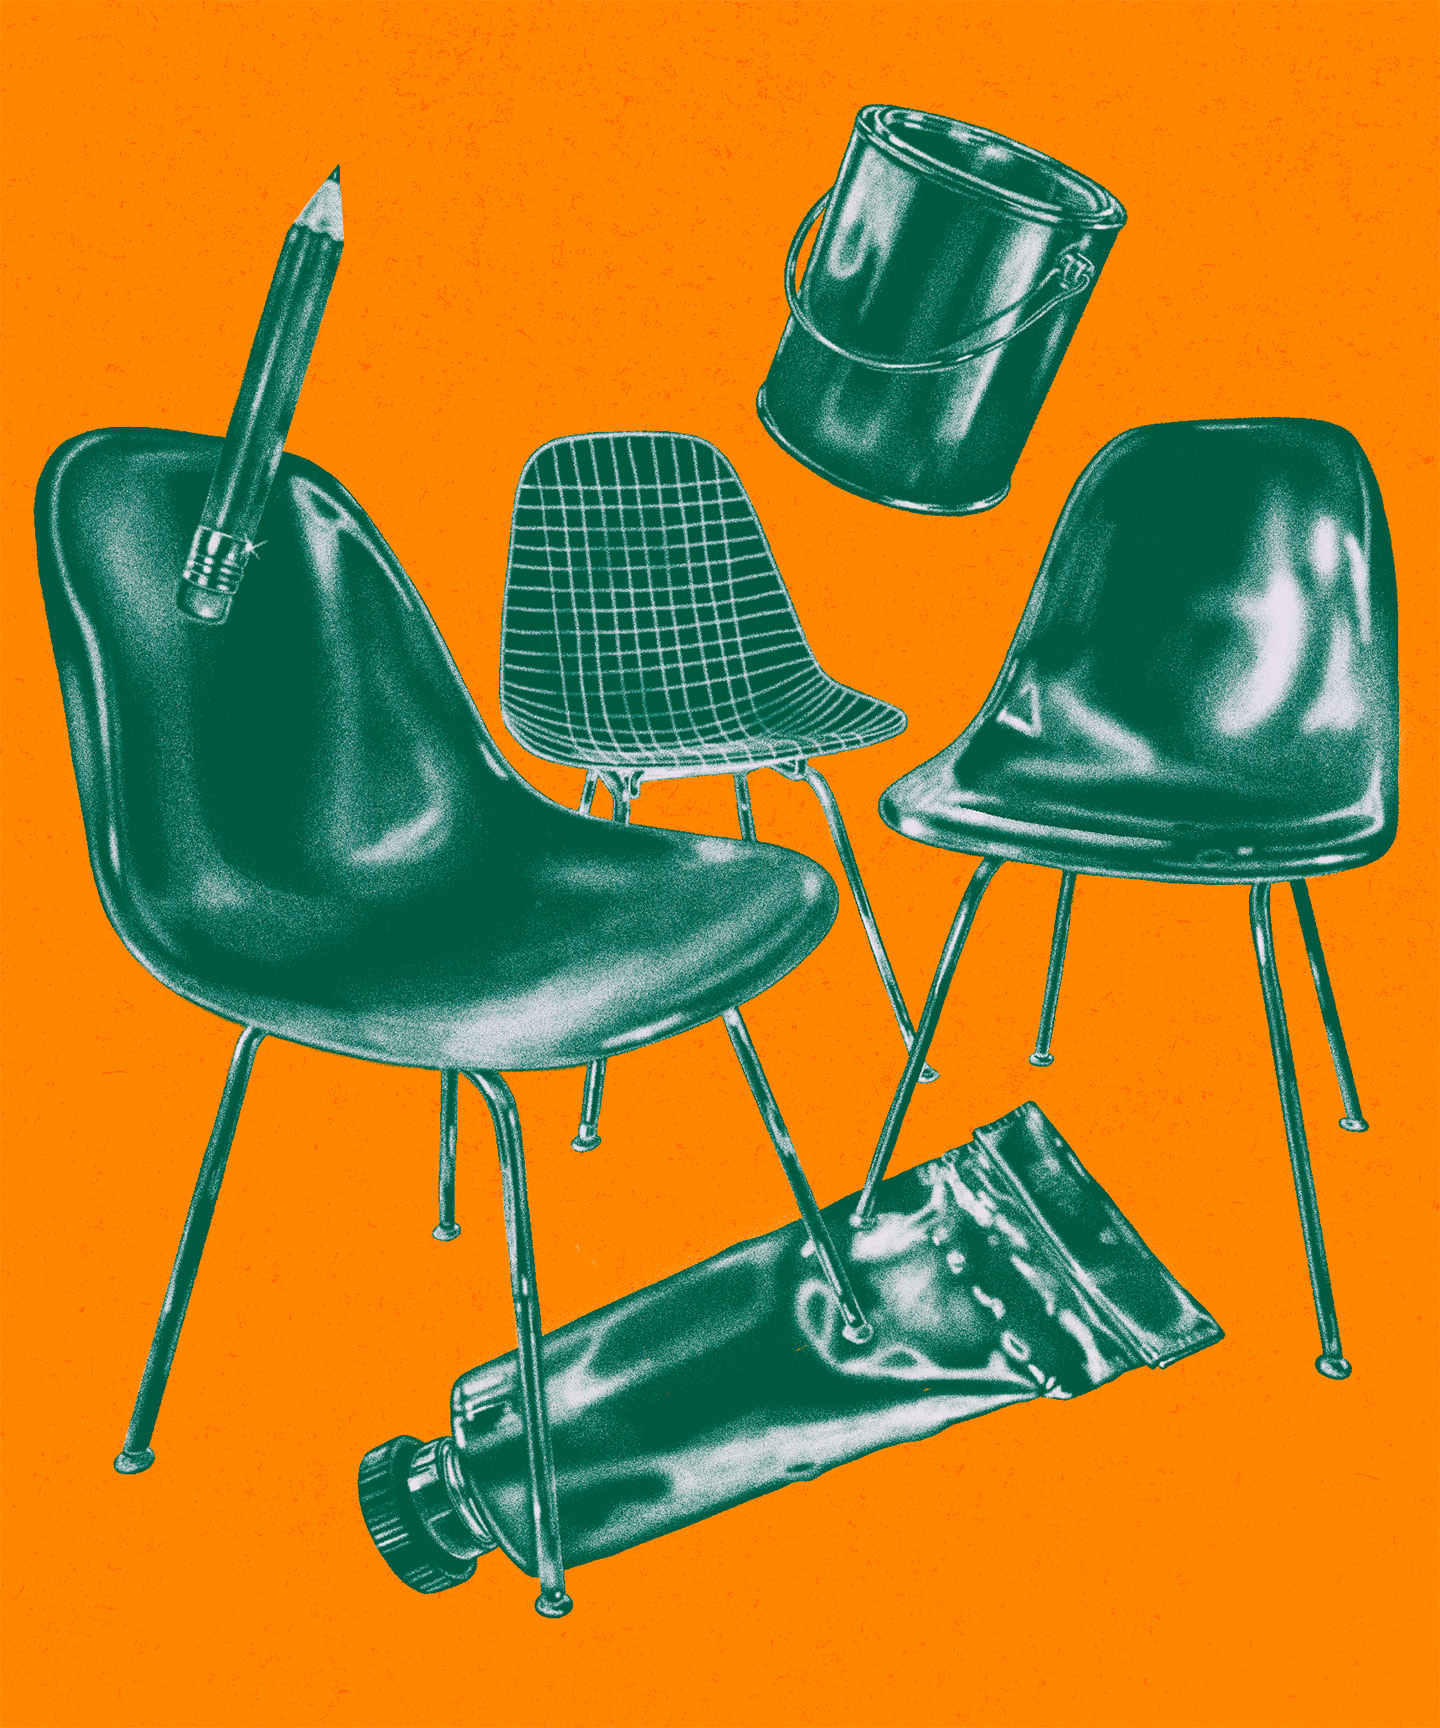 Artwork with chairs, pencils and tubes on orange background